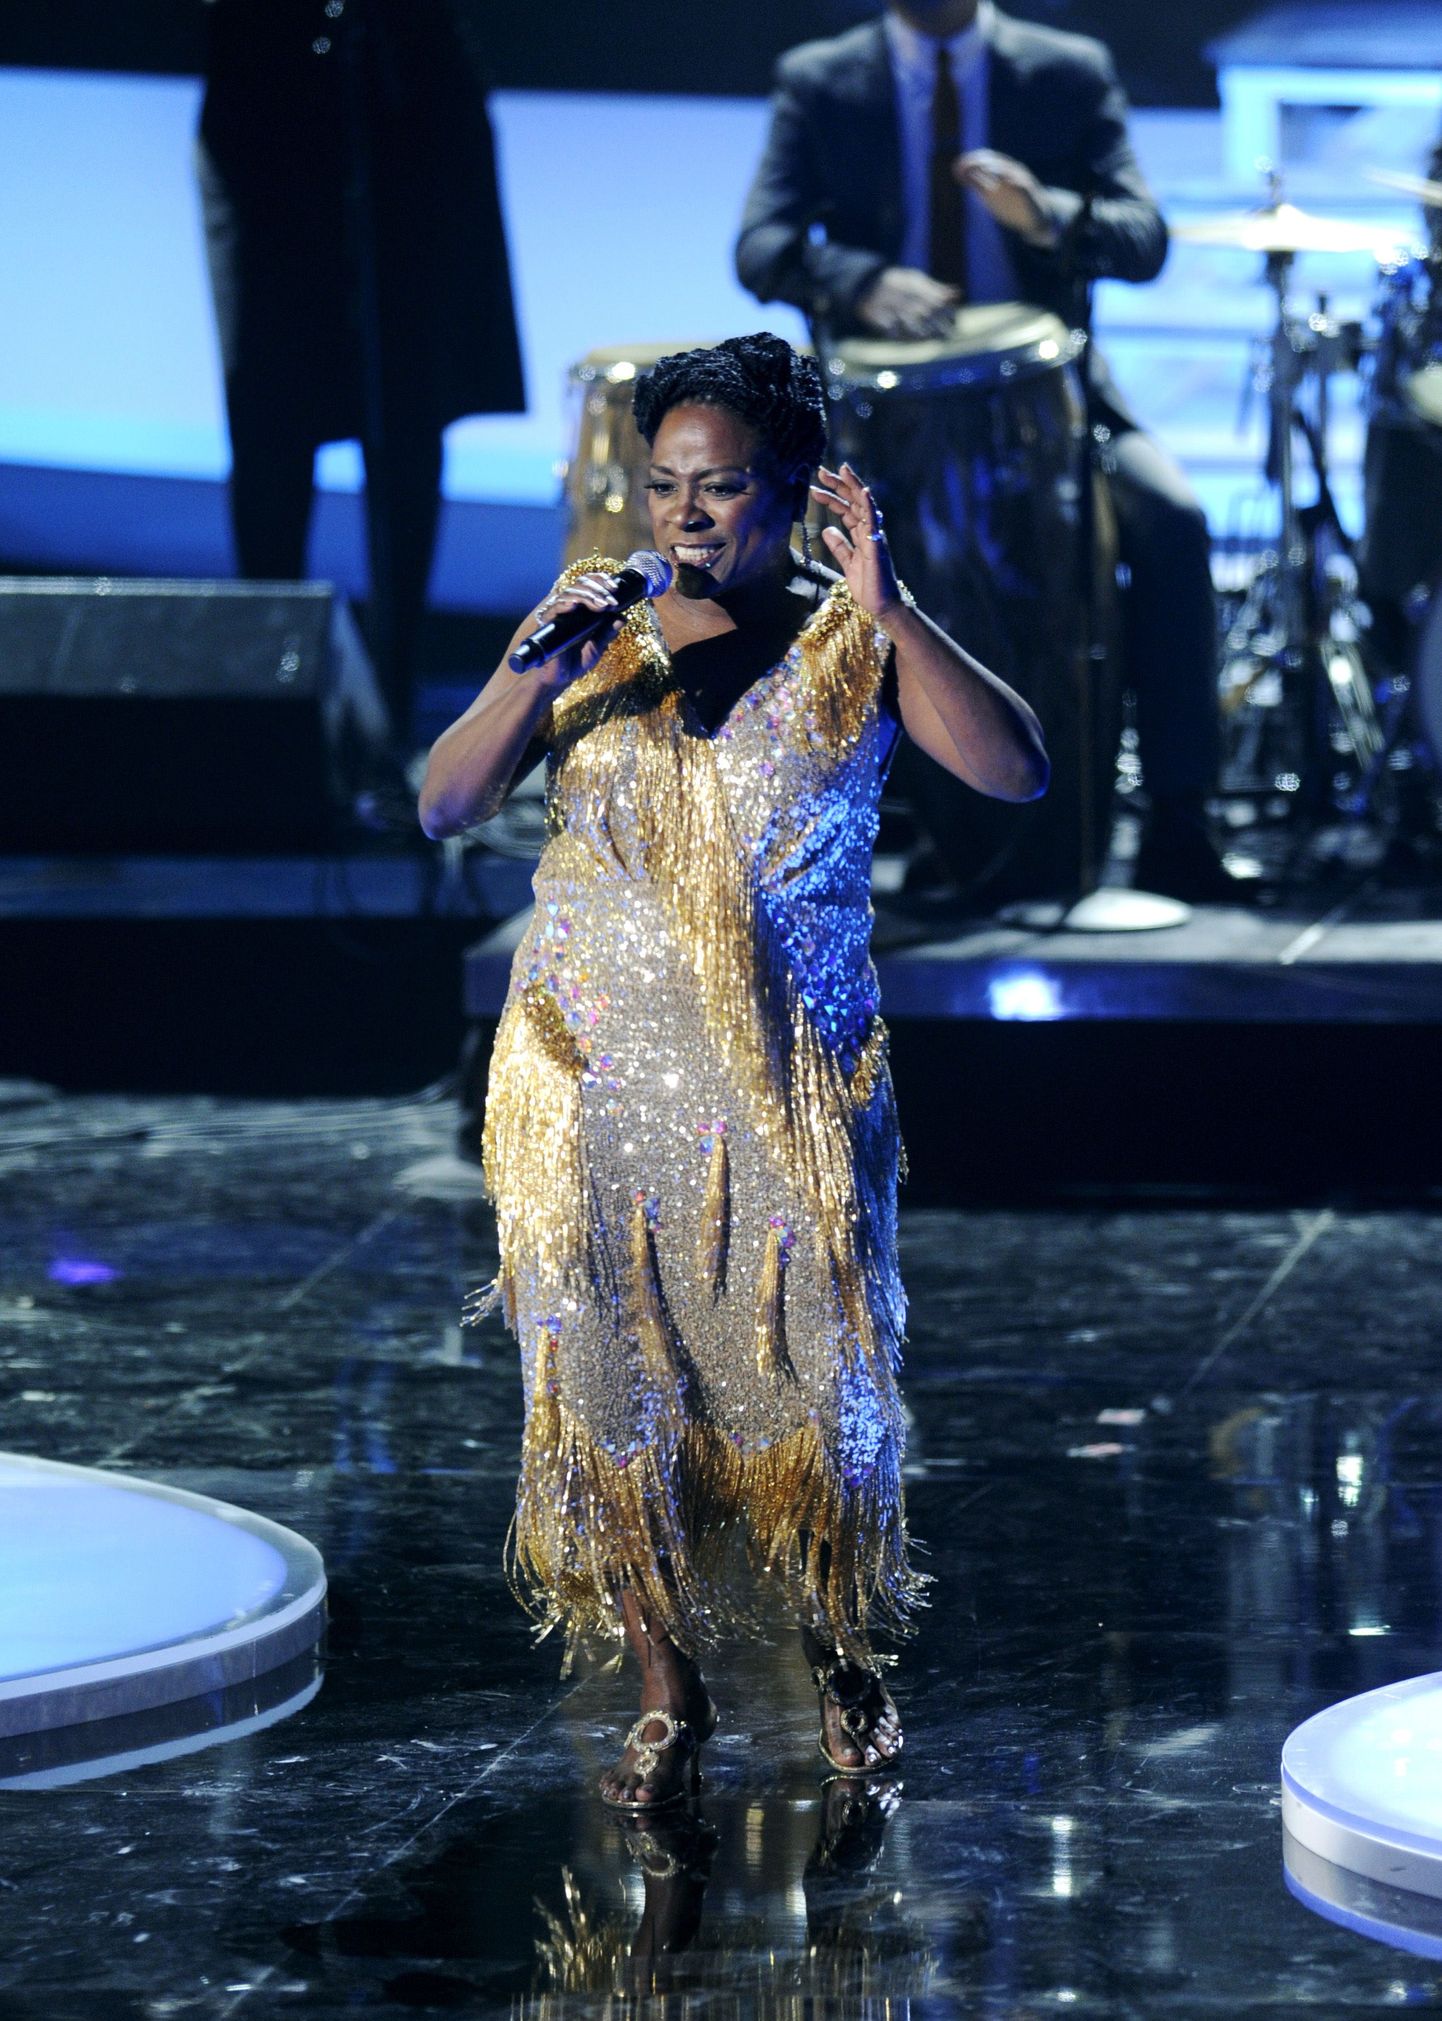 FILE - In this Dec. 18, 2011 file photo, Sharon Jones & the Dap-Kings perform onstage at the "Vh1 Divas Celebrates Soul," in New York. Jones, a big-voiced soul singer who performed with high energy onstage has died at age 60 in New York, after battling pancreatic cancer. Her representative Judy Miller Silverman says she died Friday, Nov. 18, 2016, at a Cooperstown hospital surrounded by her band, the Dap-Kings. (AP Photo/Evan Agostini, File)